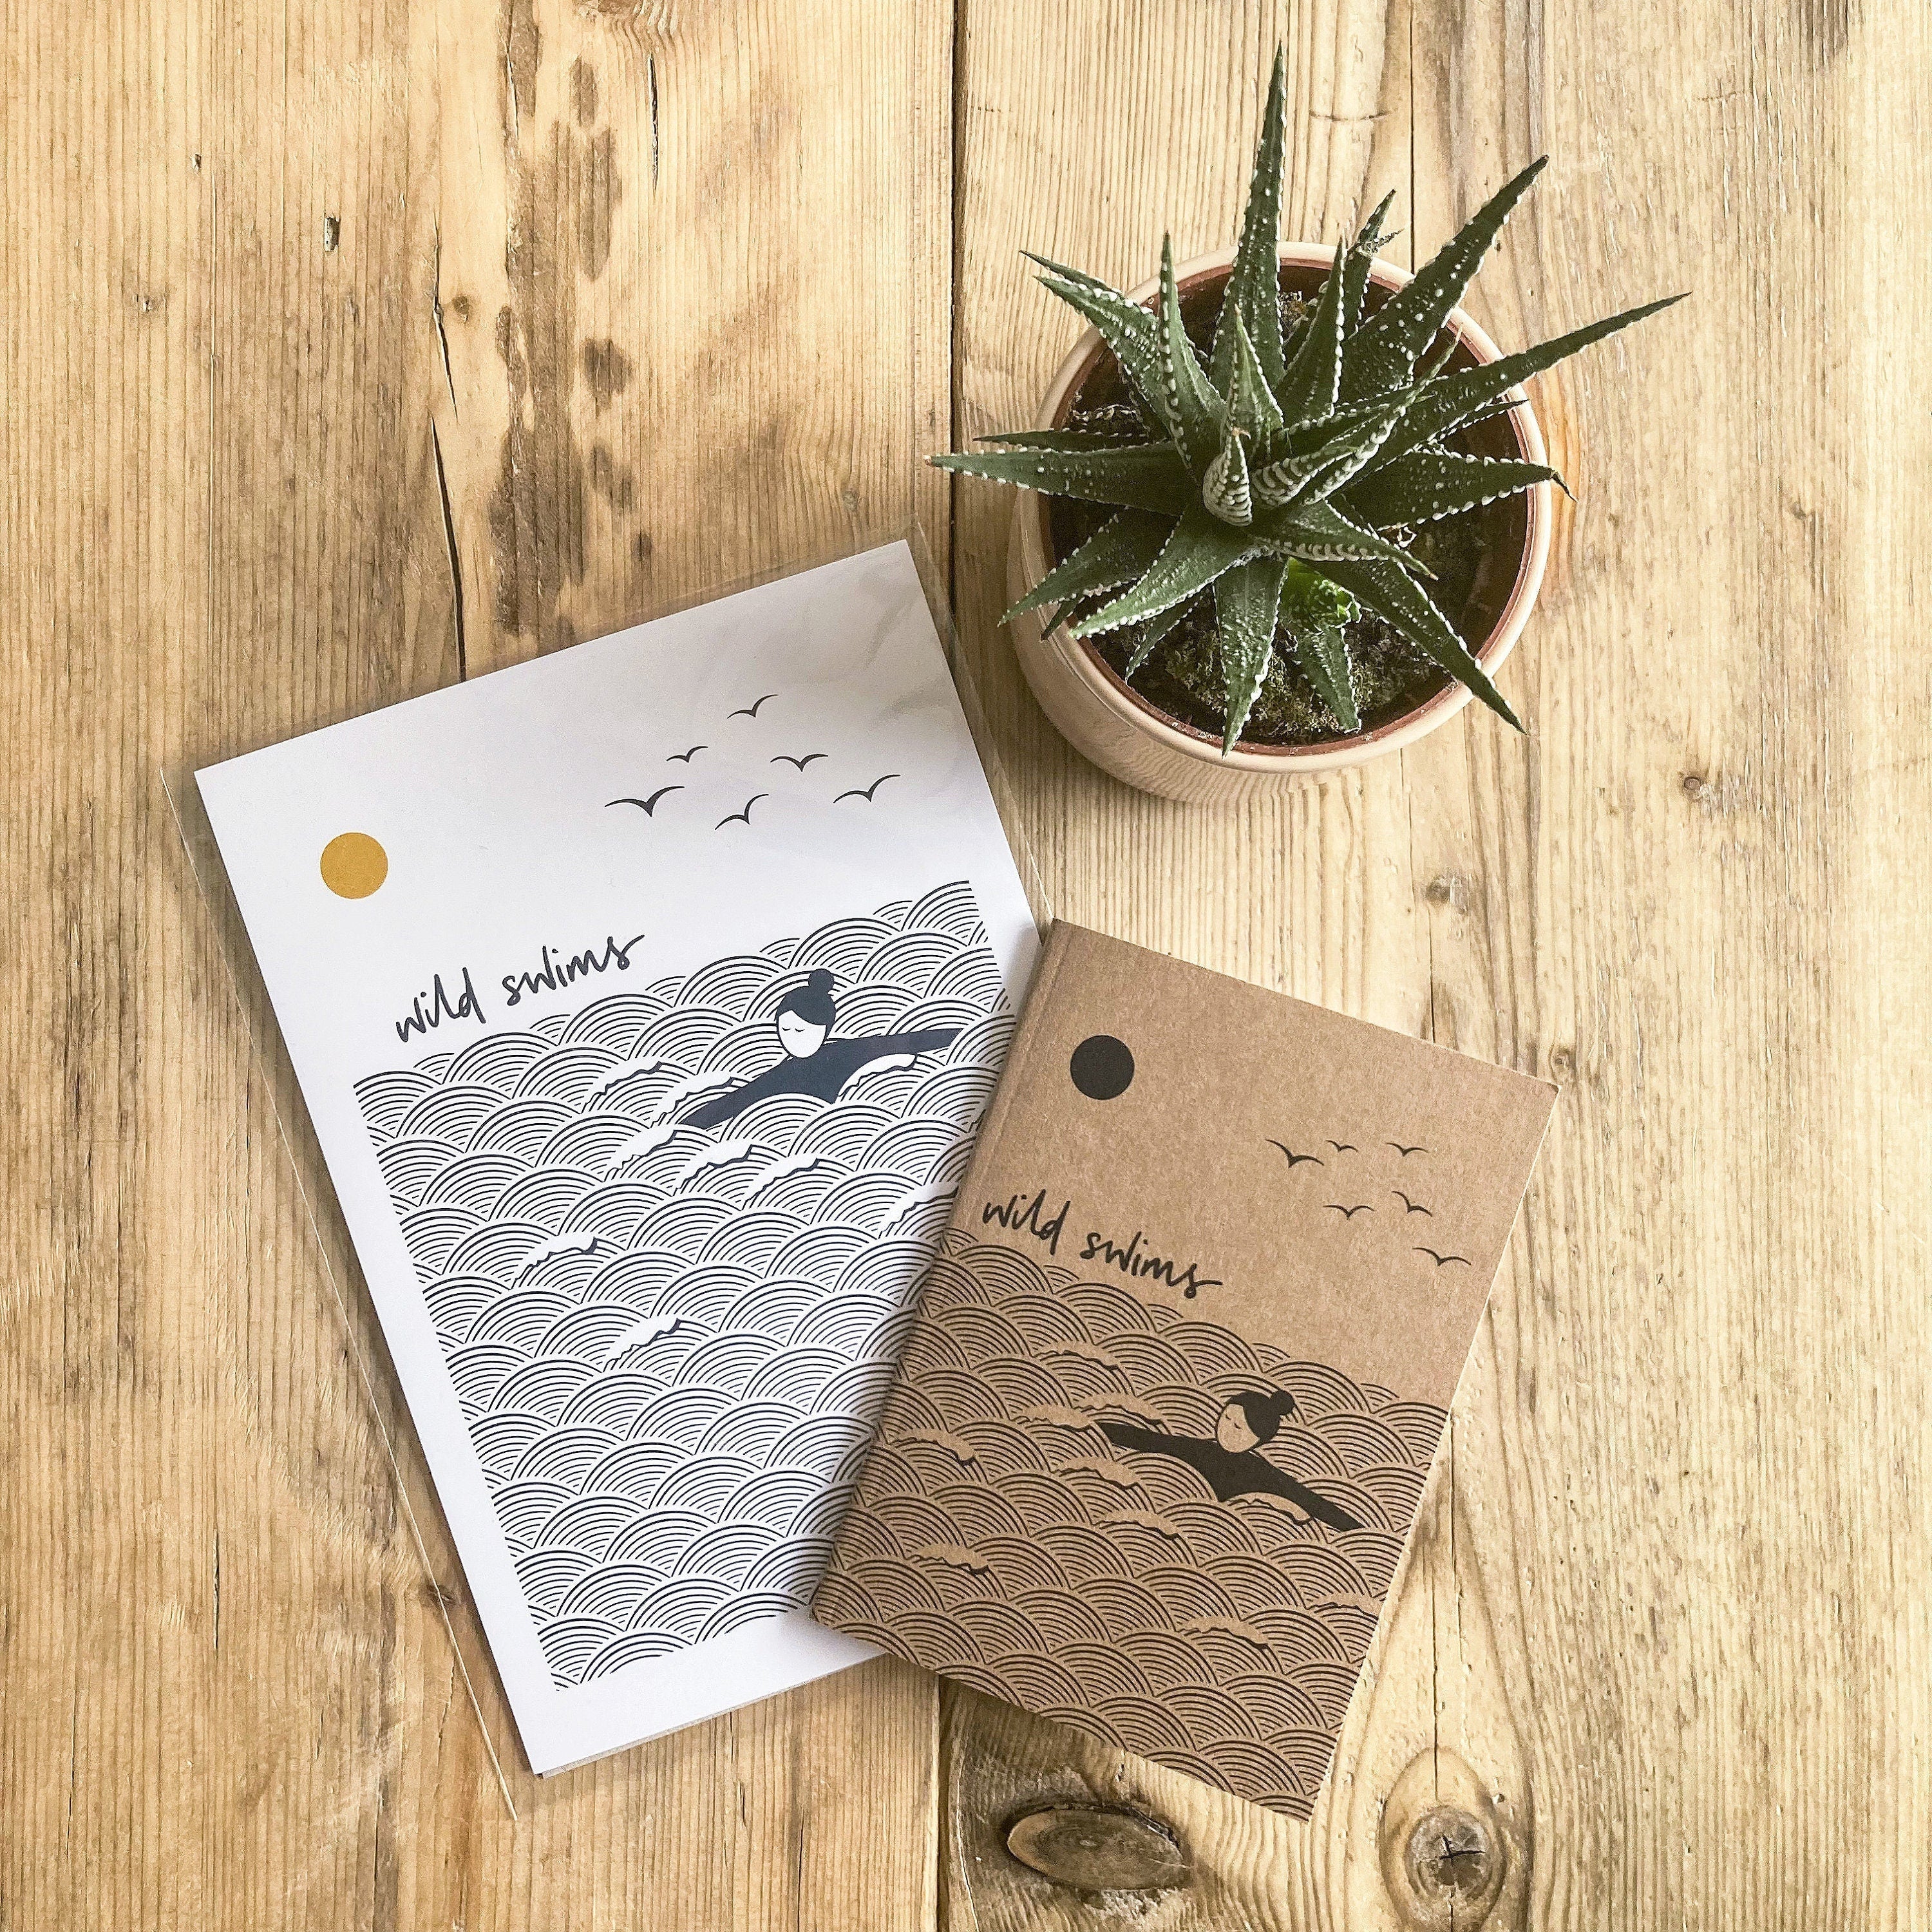 Gift set for a wild swimmer - A5 print and A6 notebook